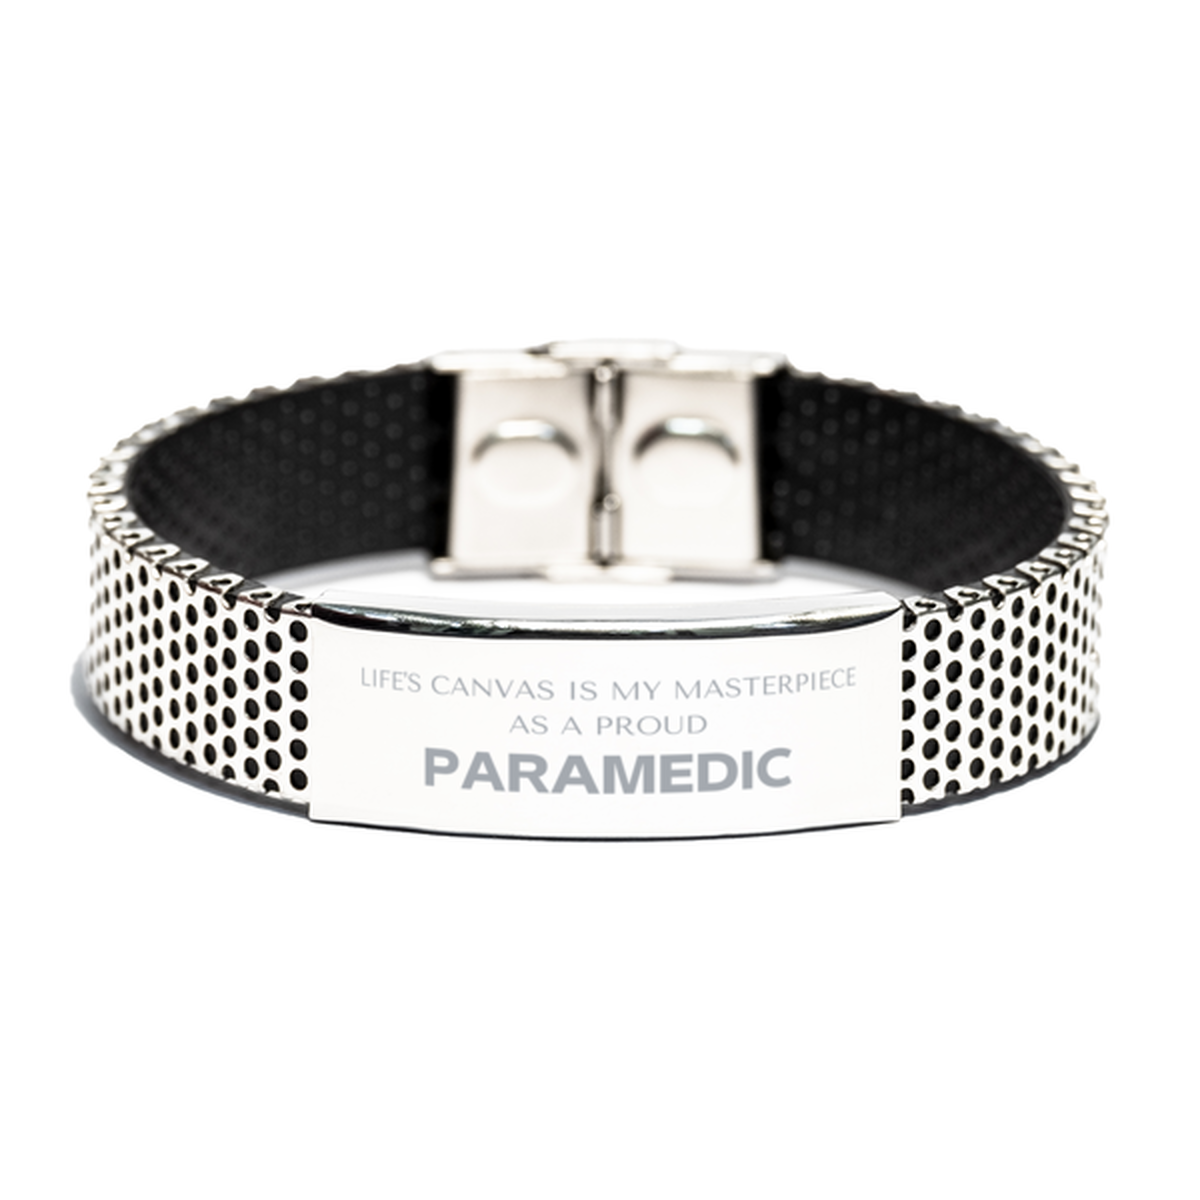 Proud Paramedic Gifts, Life's canvas is my masterpiece, Epic Birthday Christmas Unique Stainless Steel Bracelet For Paramedic, Coworkers, Men, Women, Friends